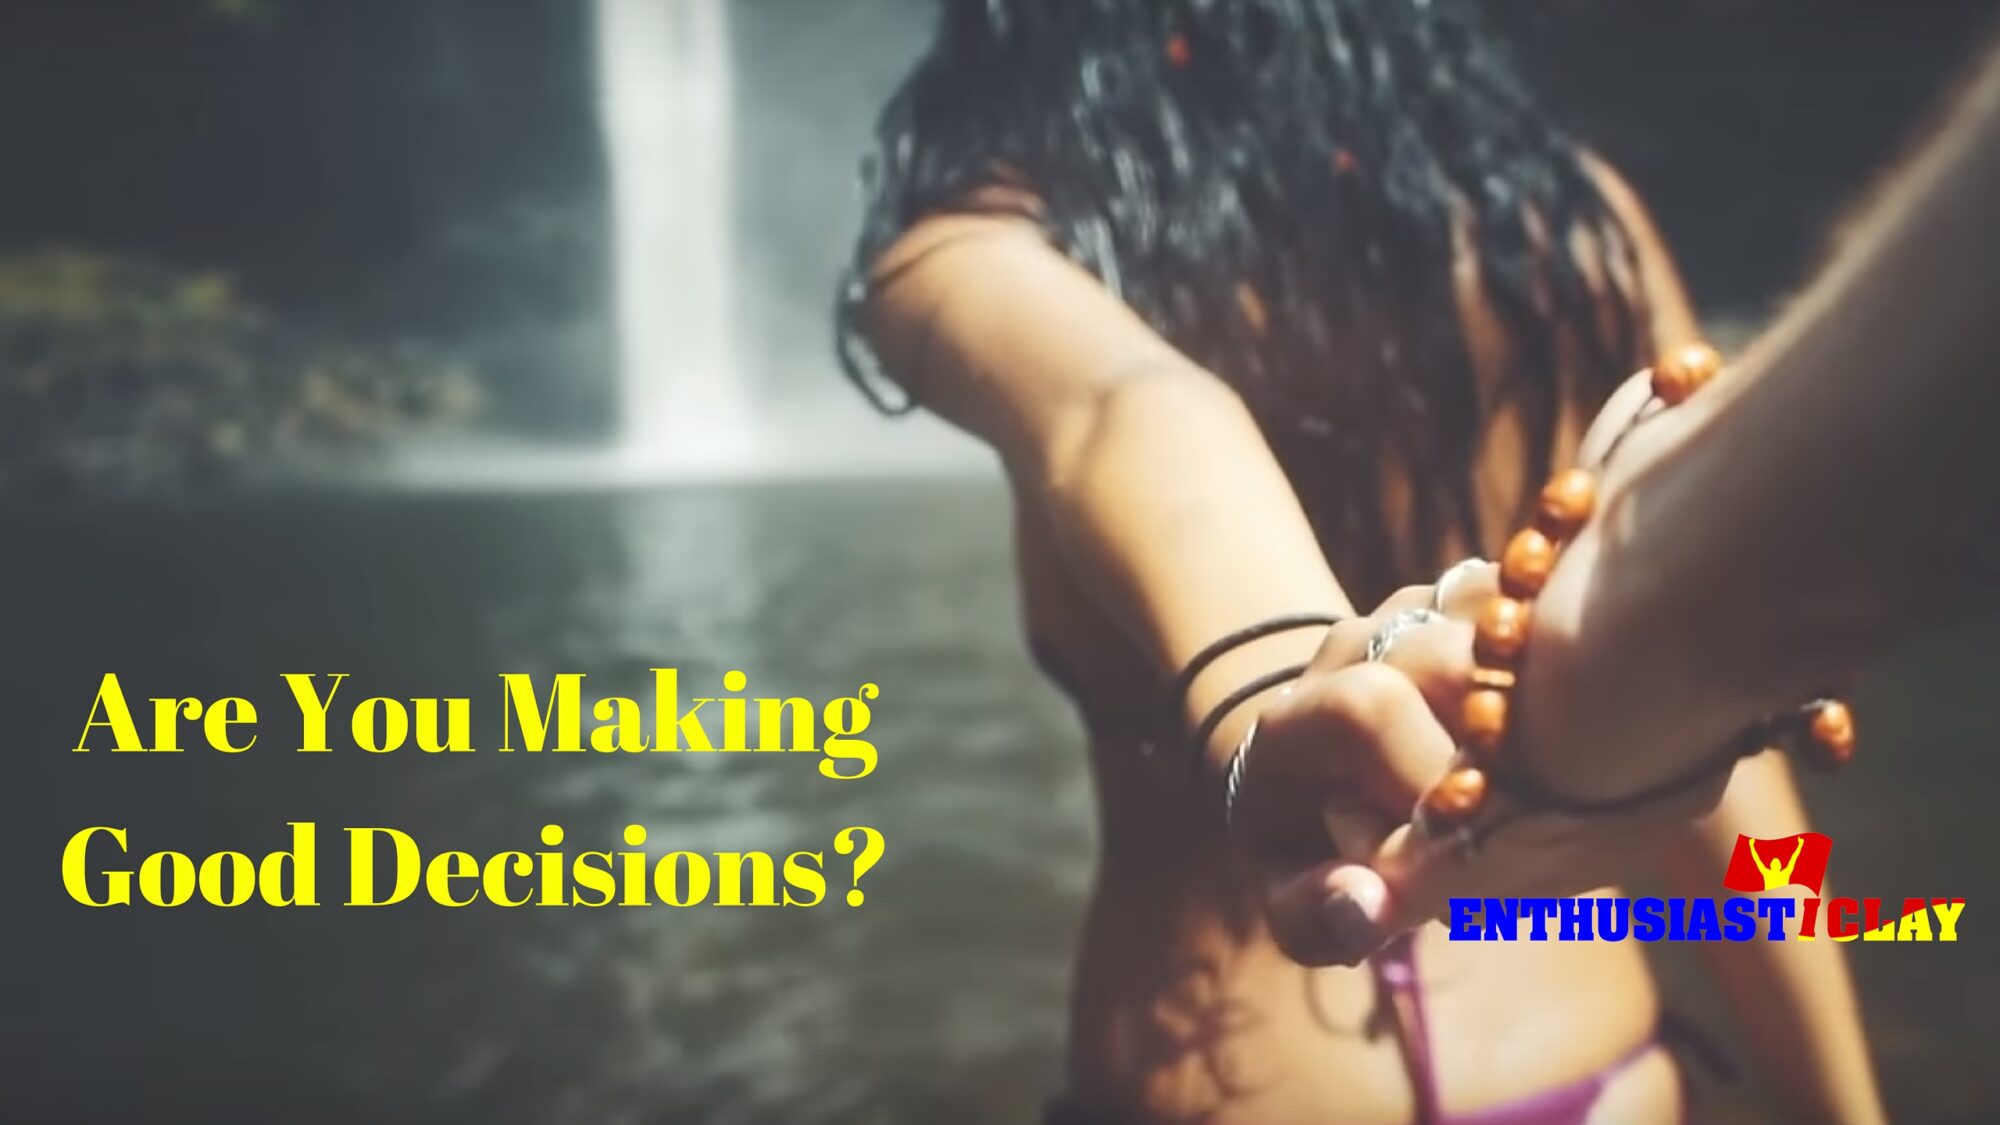 Decisions… Decisions… Love this video!